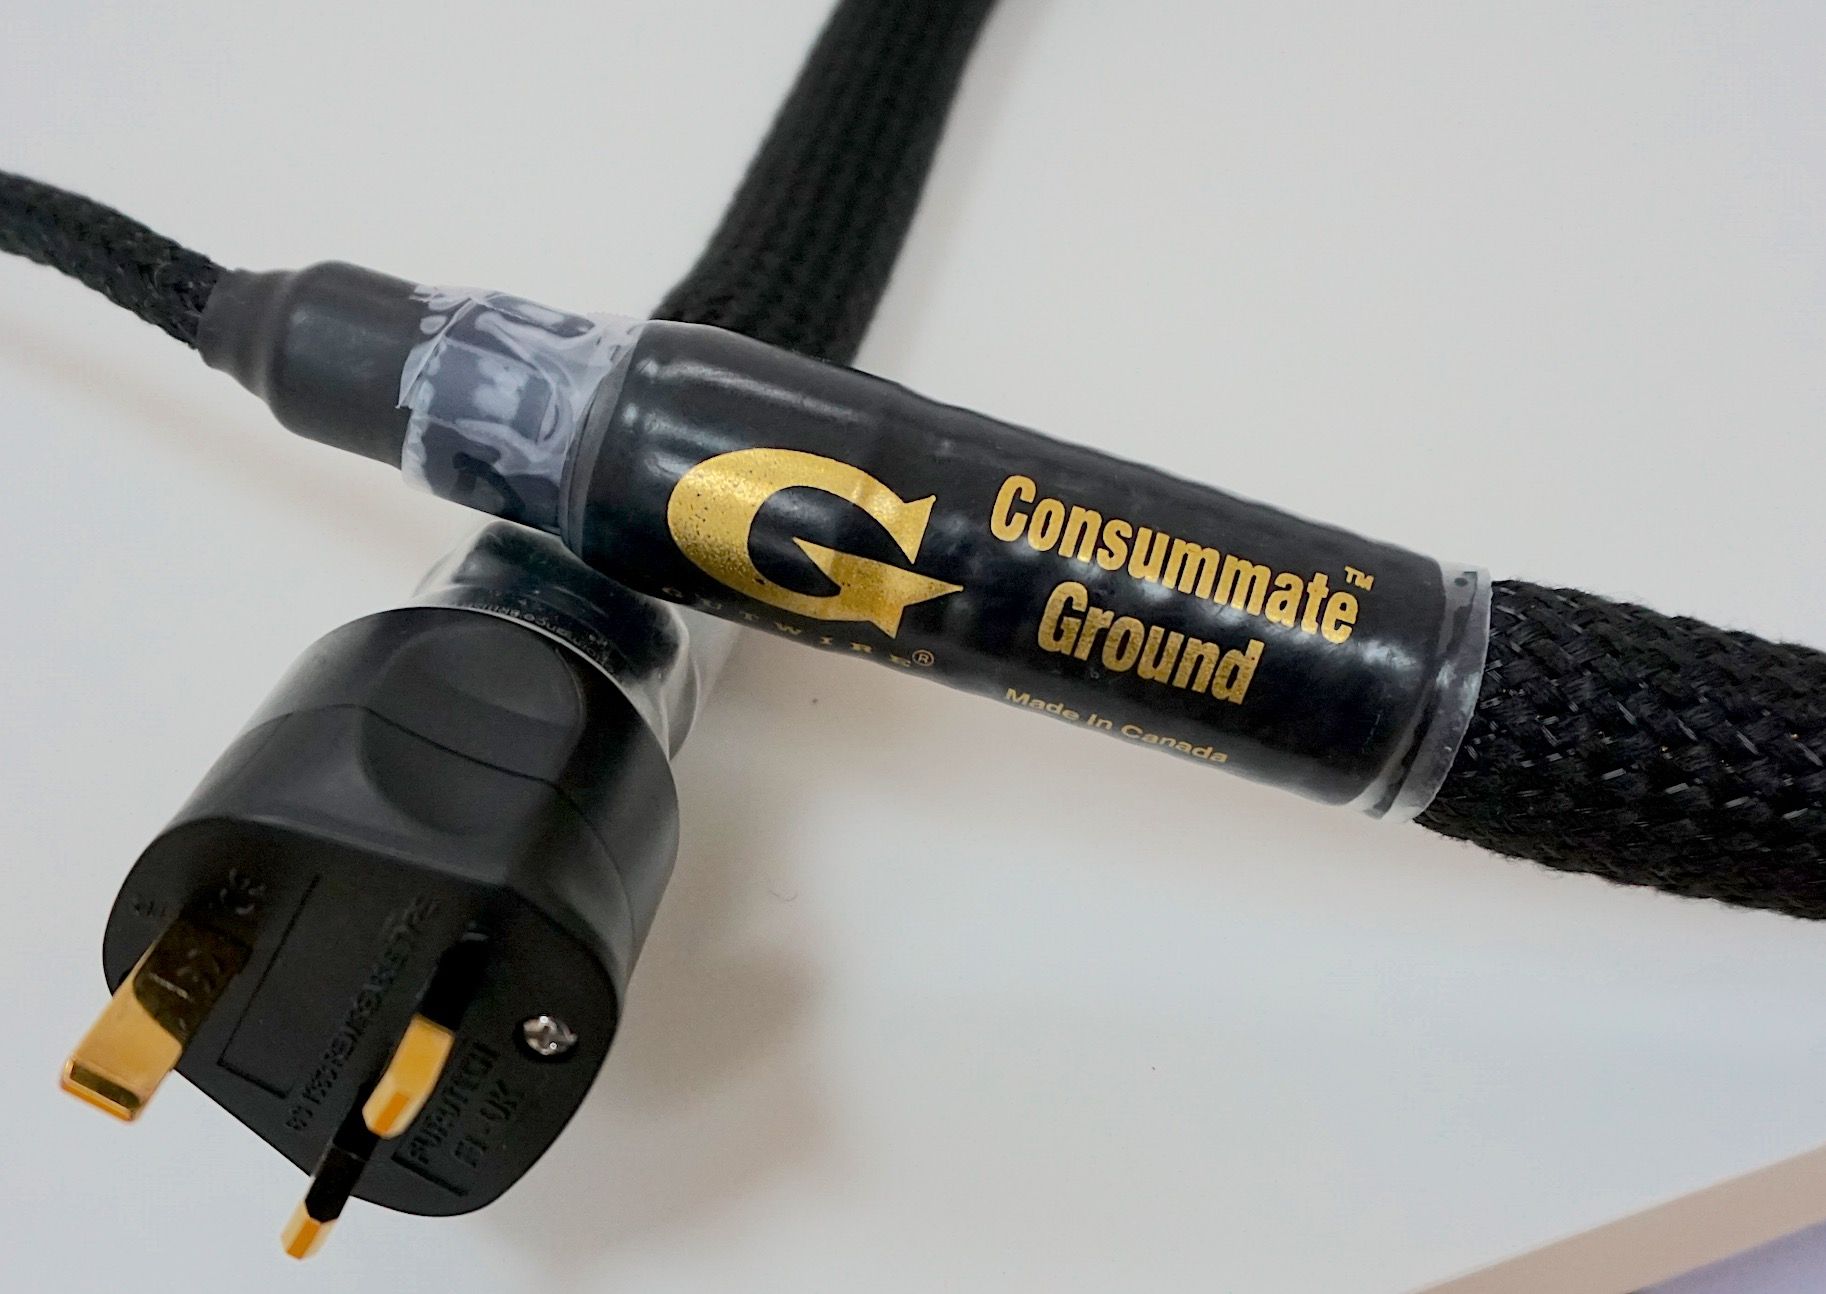 Consummate Ground cable from Gutwire